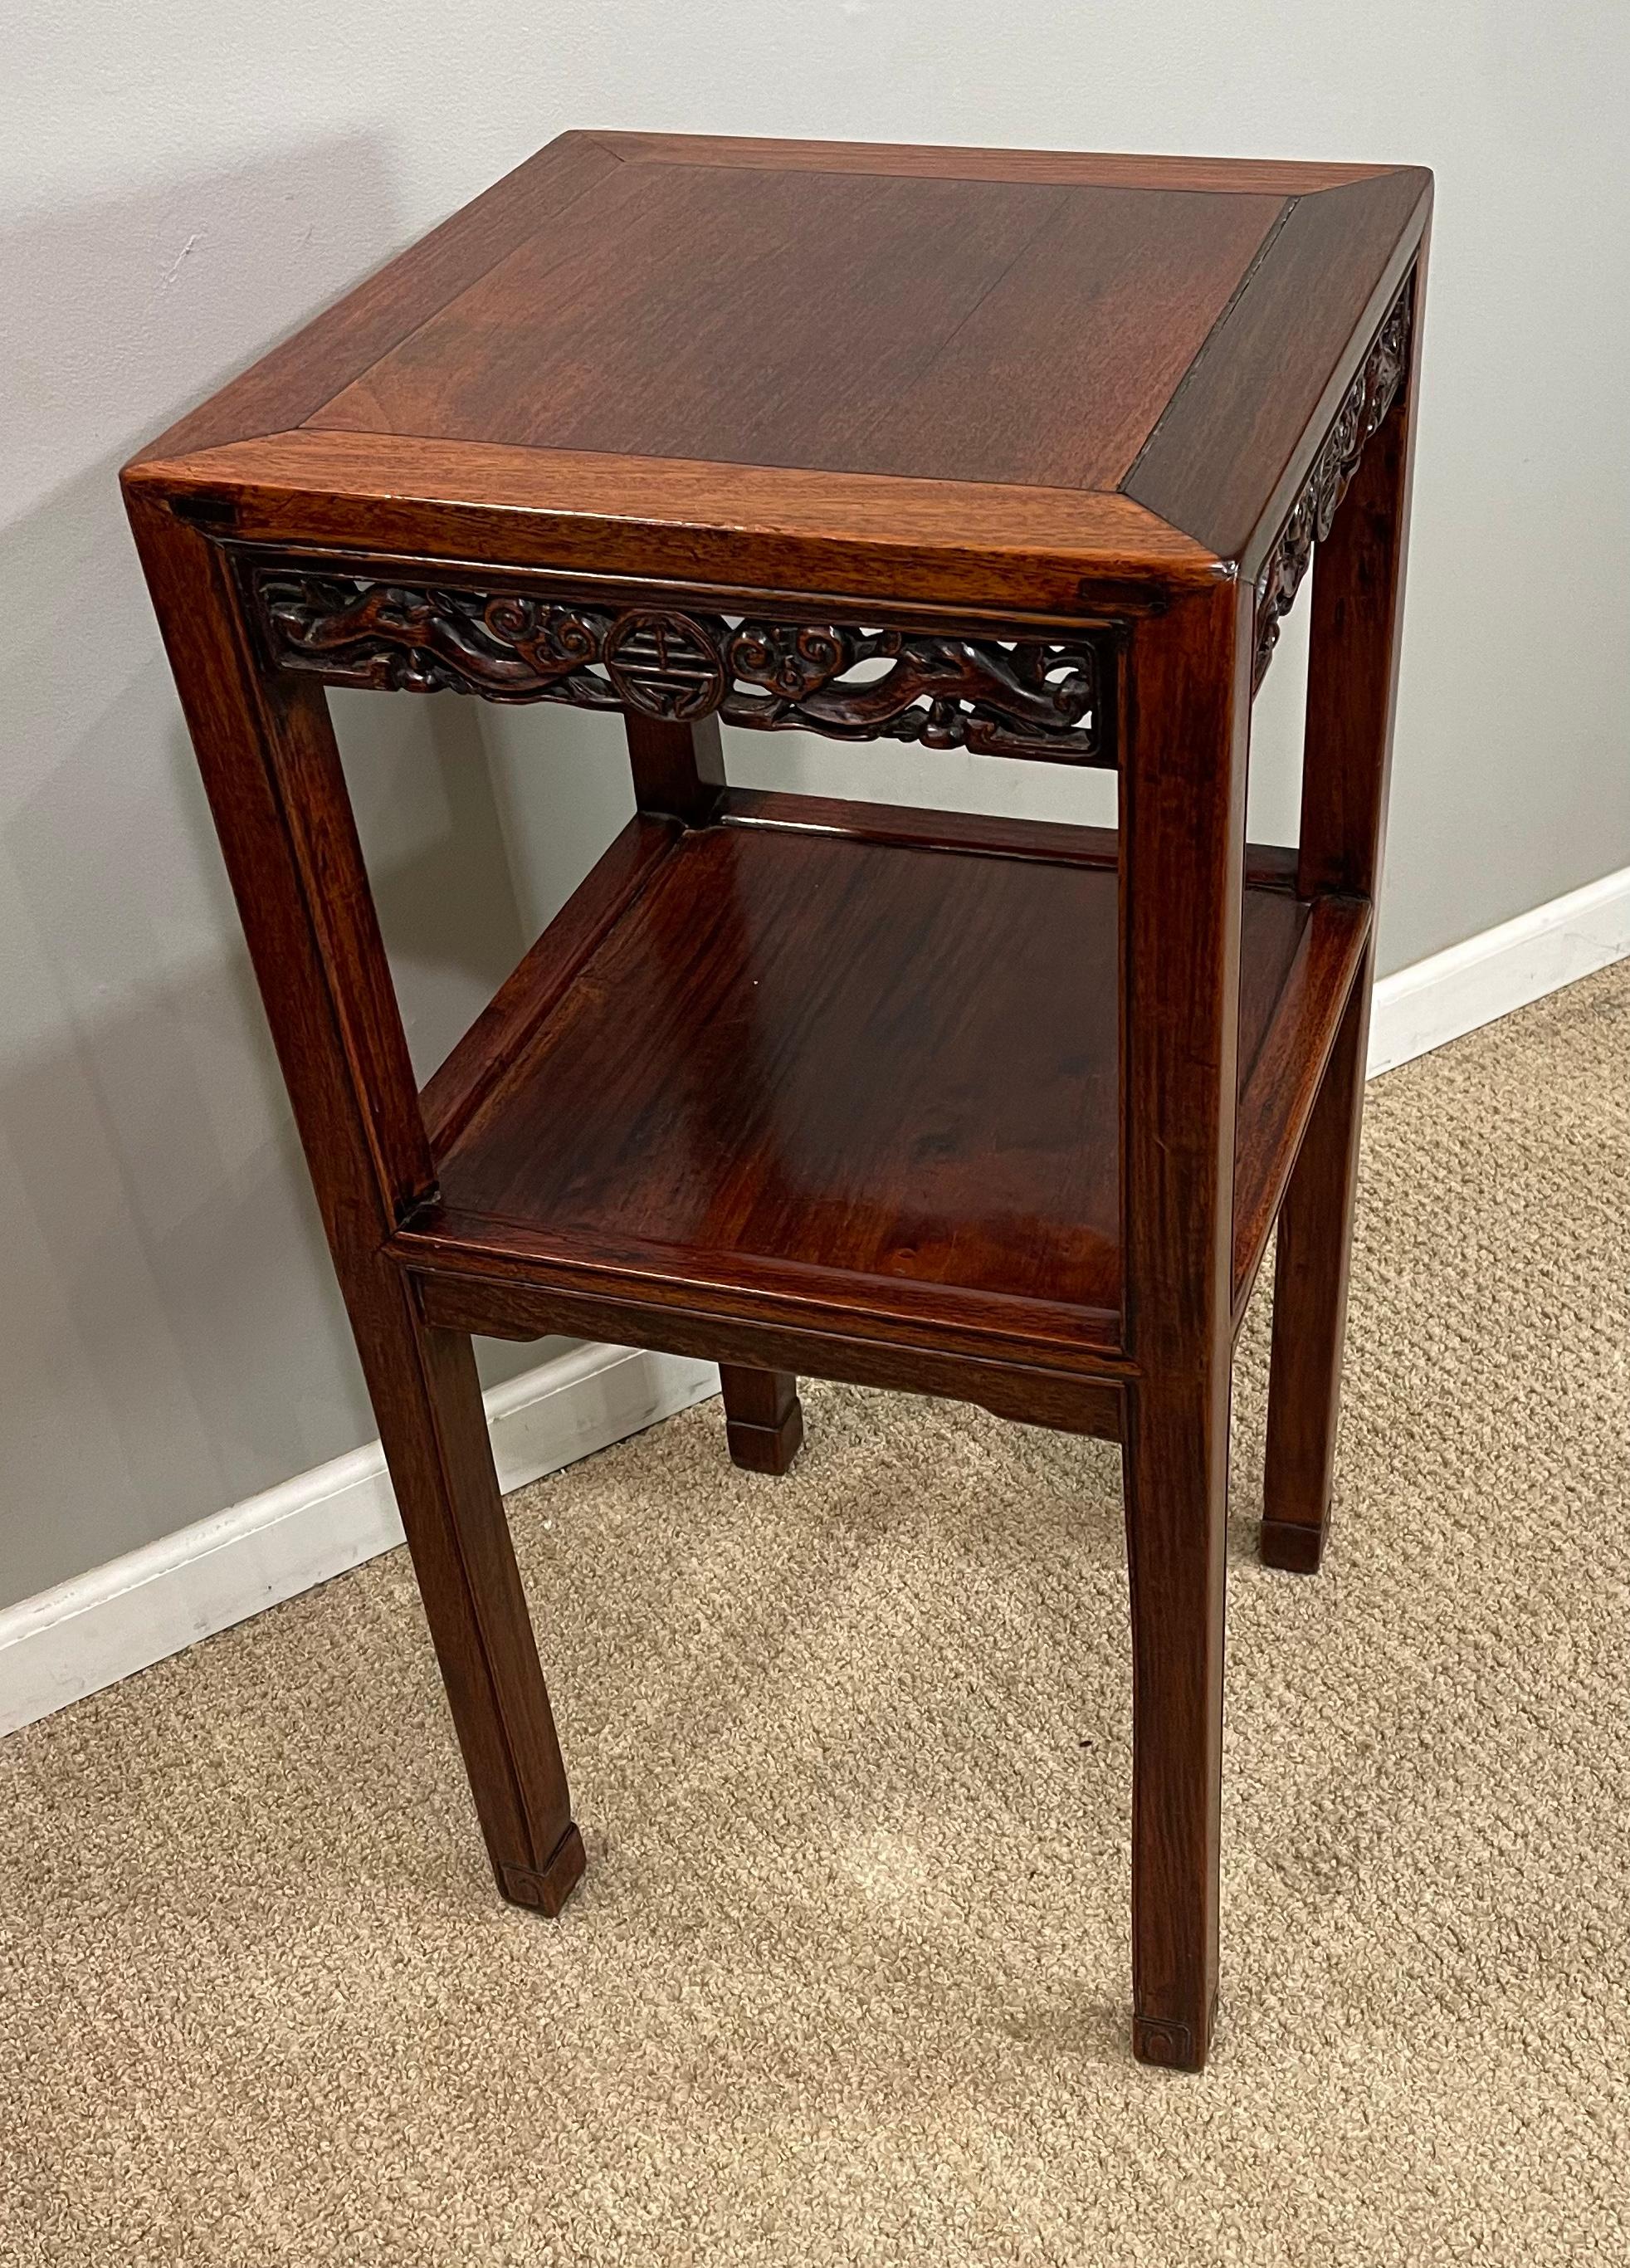 Chinese hardwood (Hungmu) tea table, late 19th century / early 20th century
Top above carved panels with lower shelf.